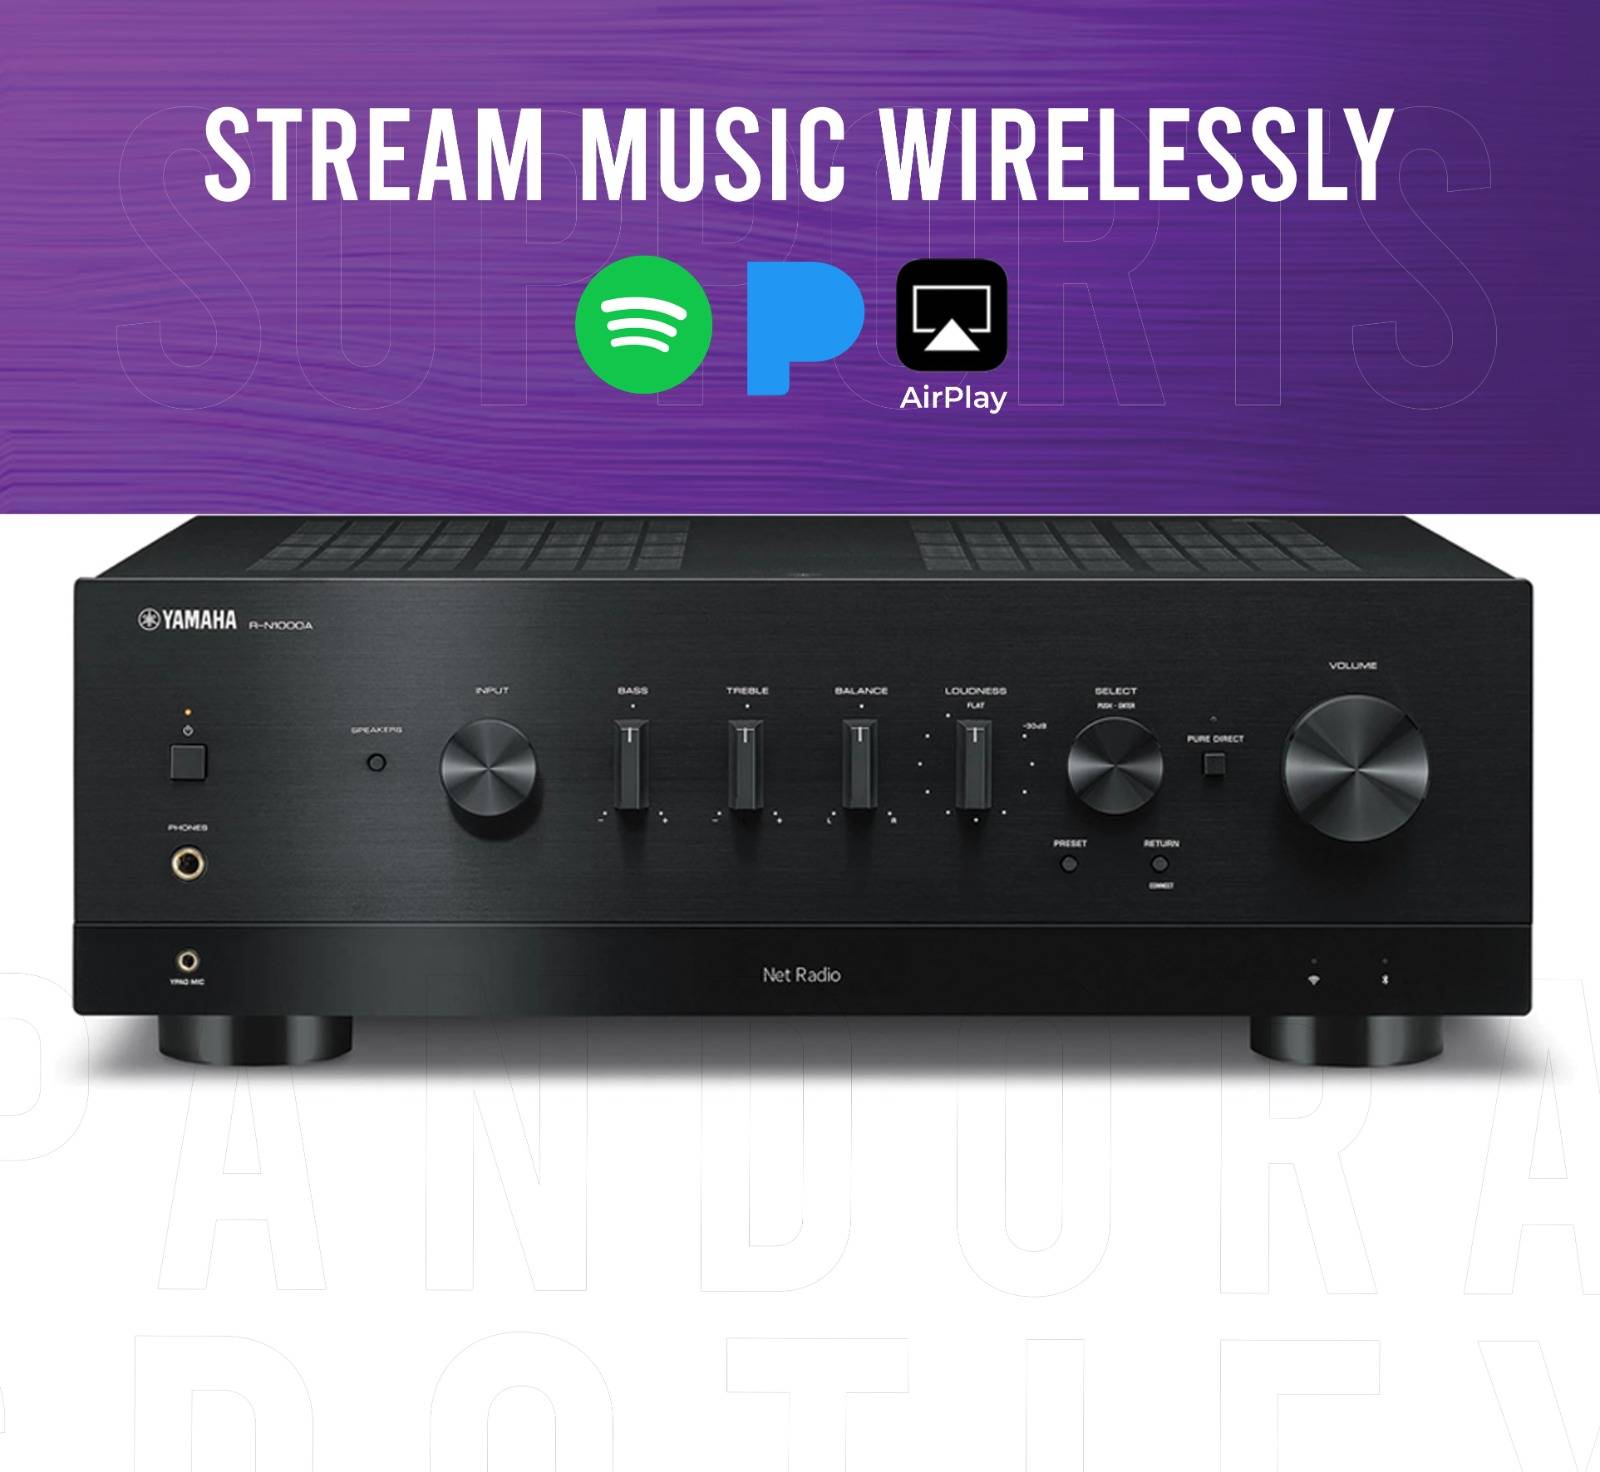 Wireless Streaming and Connectivity